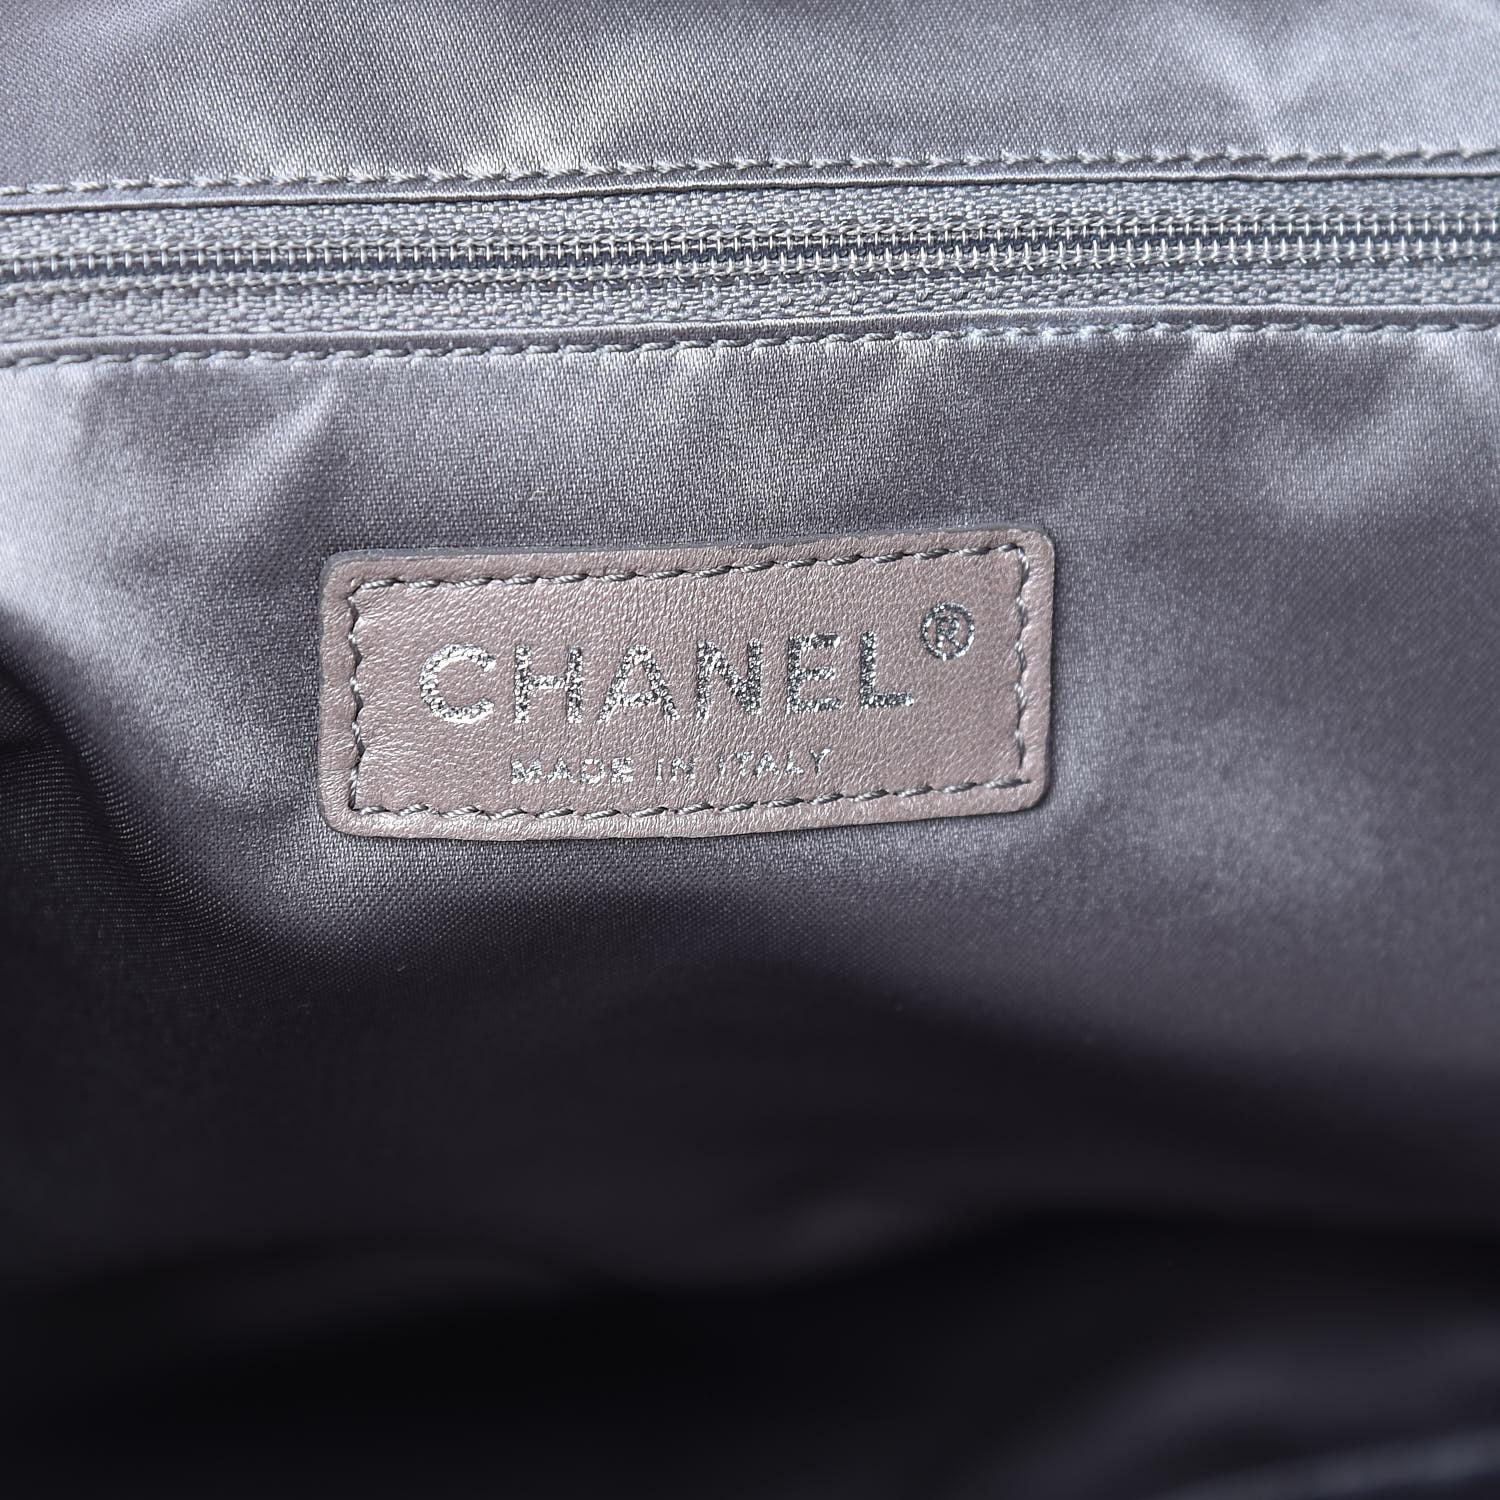 Chanel 2008 Metallic Mesh Soft Quilted Black Lambskin Leather Large Hobo Bag For Sale 11